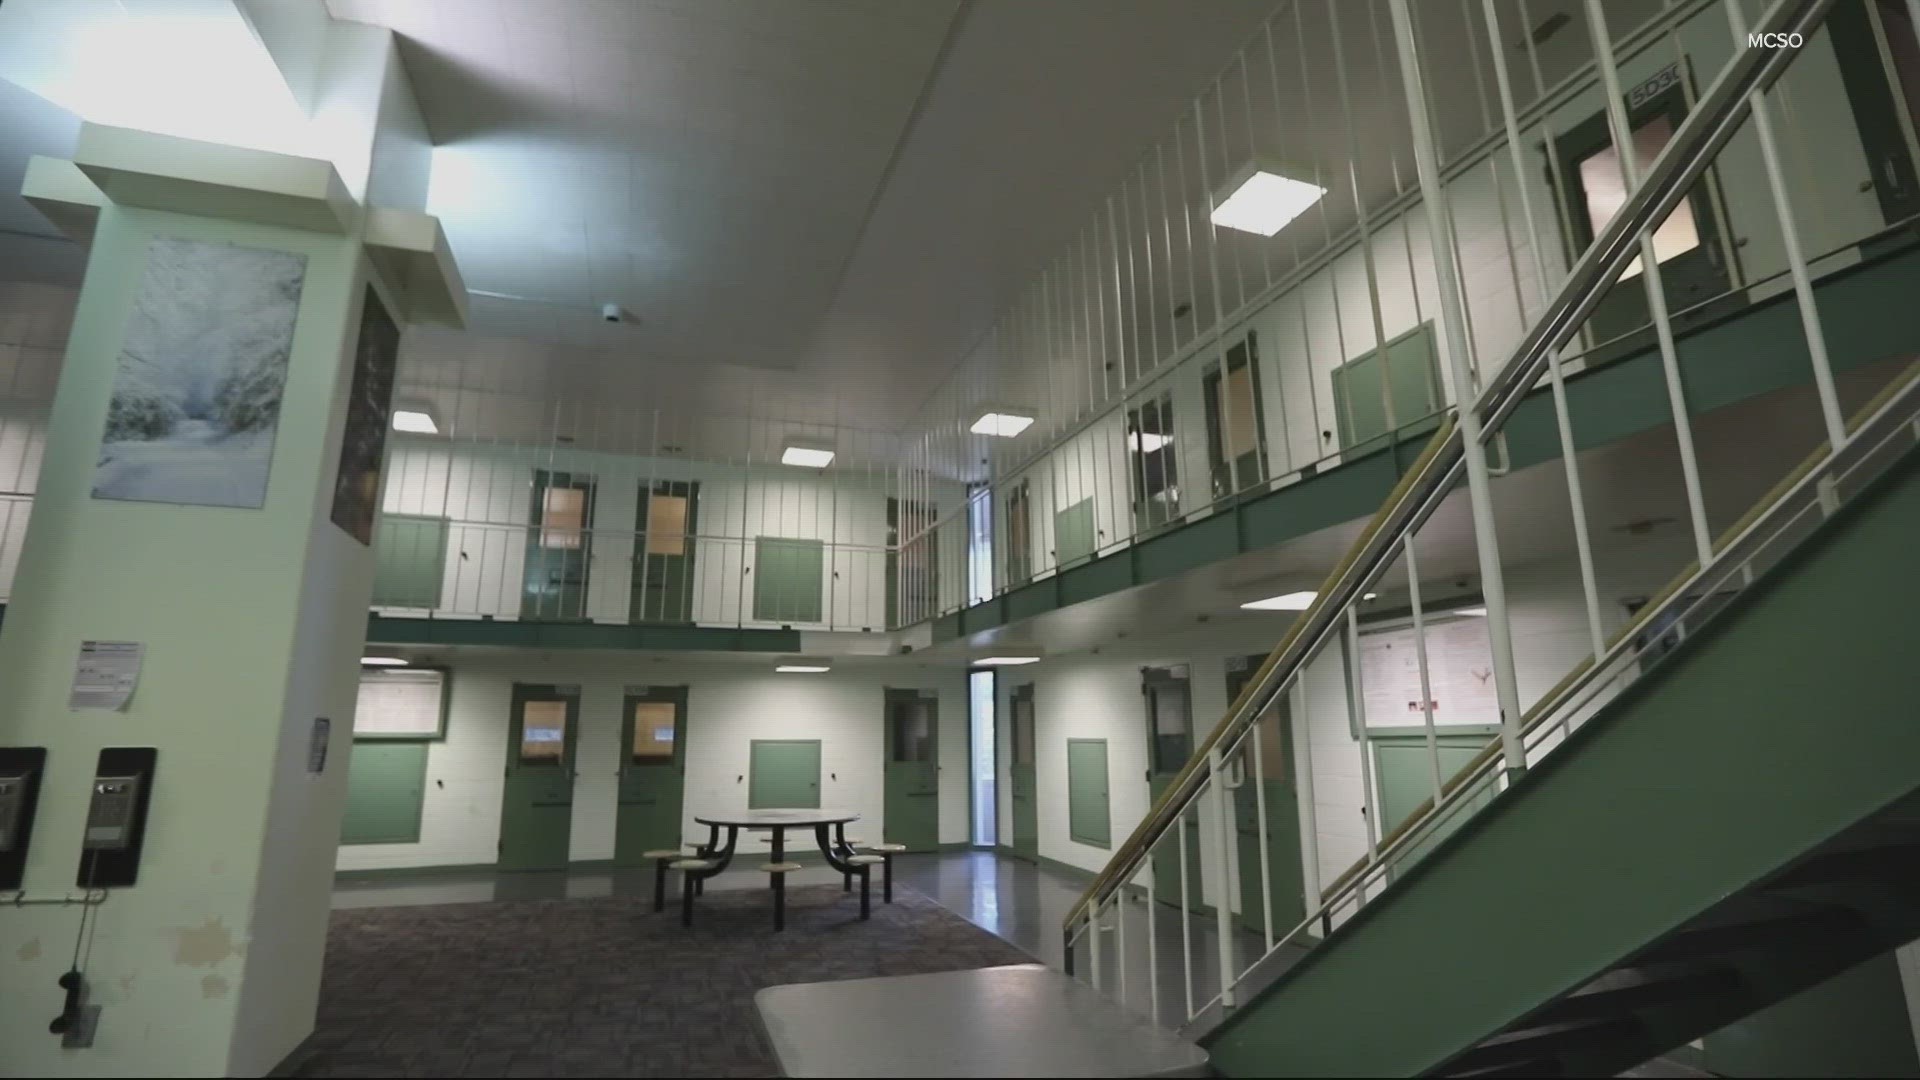 A recent audit reveals a spike in inmate deaths and inadequate care in handling inmates struggling with mental health issues.